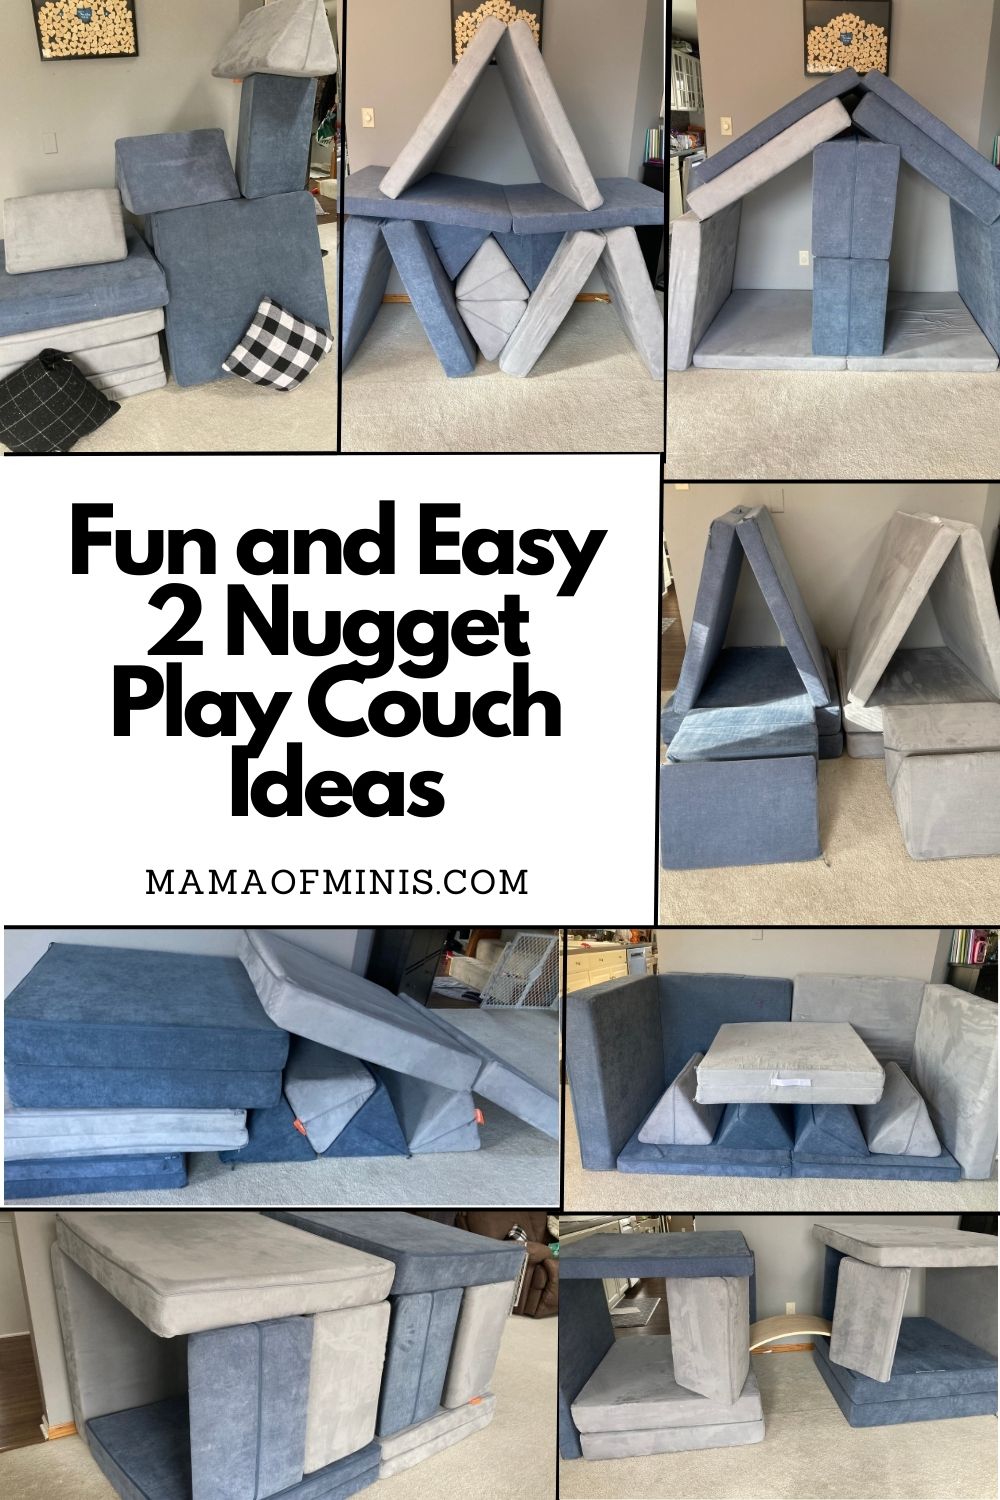 Fun and Easy 2 Nugget Play Couch Ideas